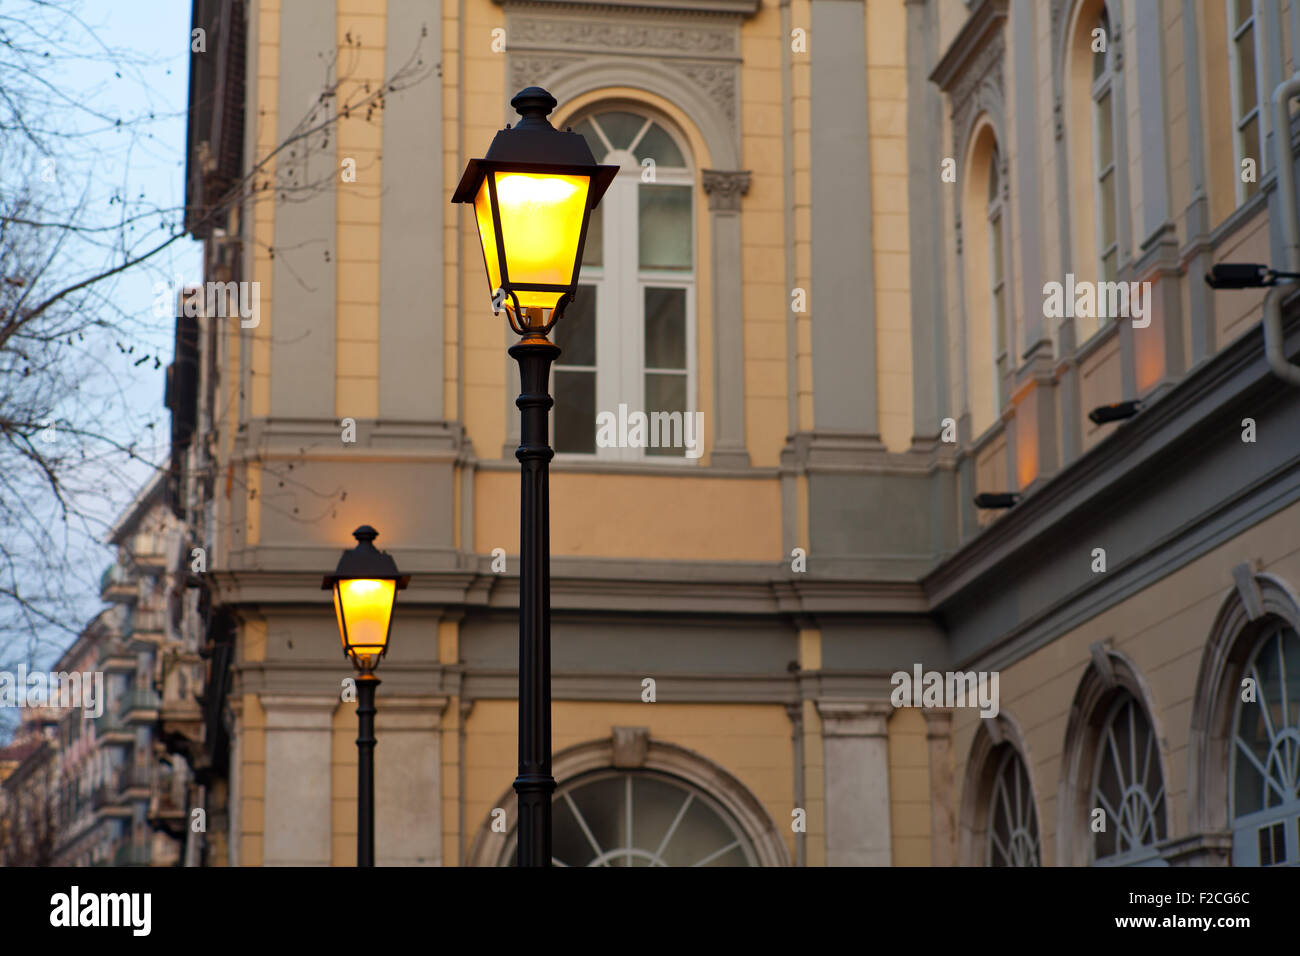 View of illuminated streetlamps in Trieste, Italy Stock Photo